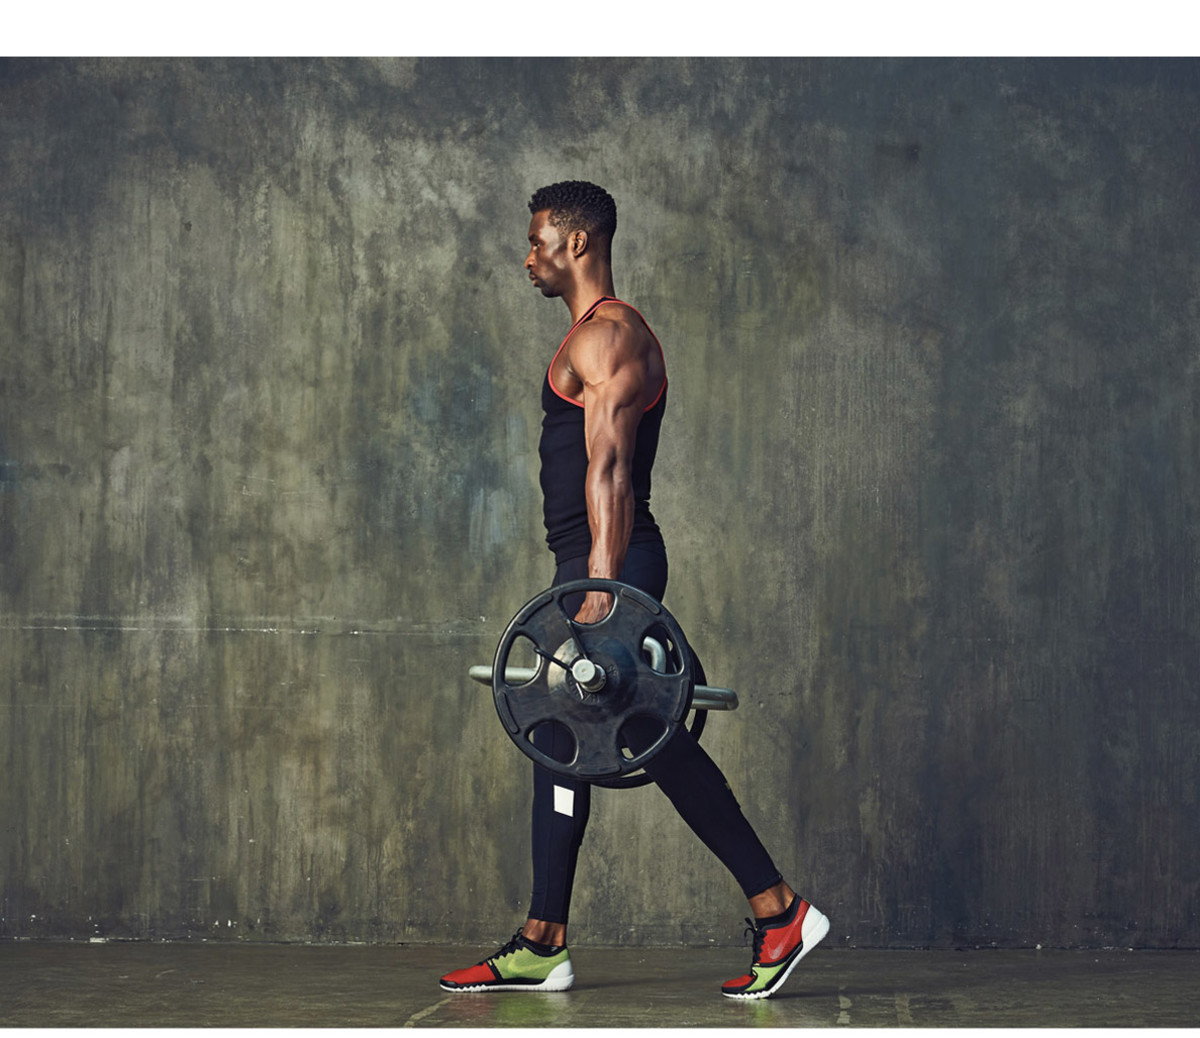 19 workout essentials you need to enhance your gym sessions